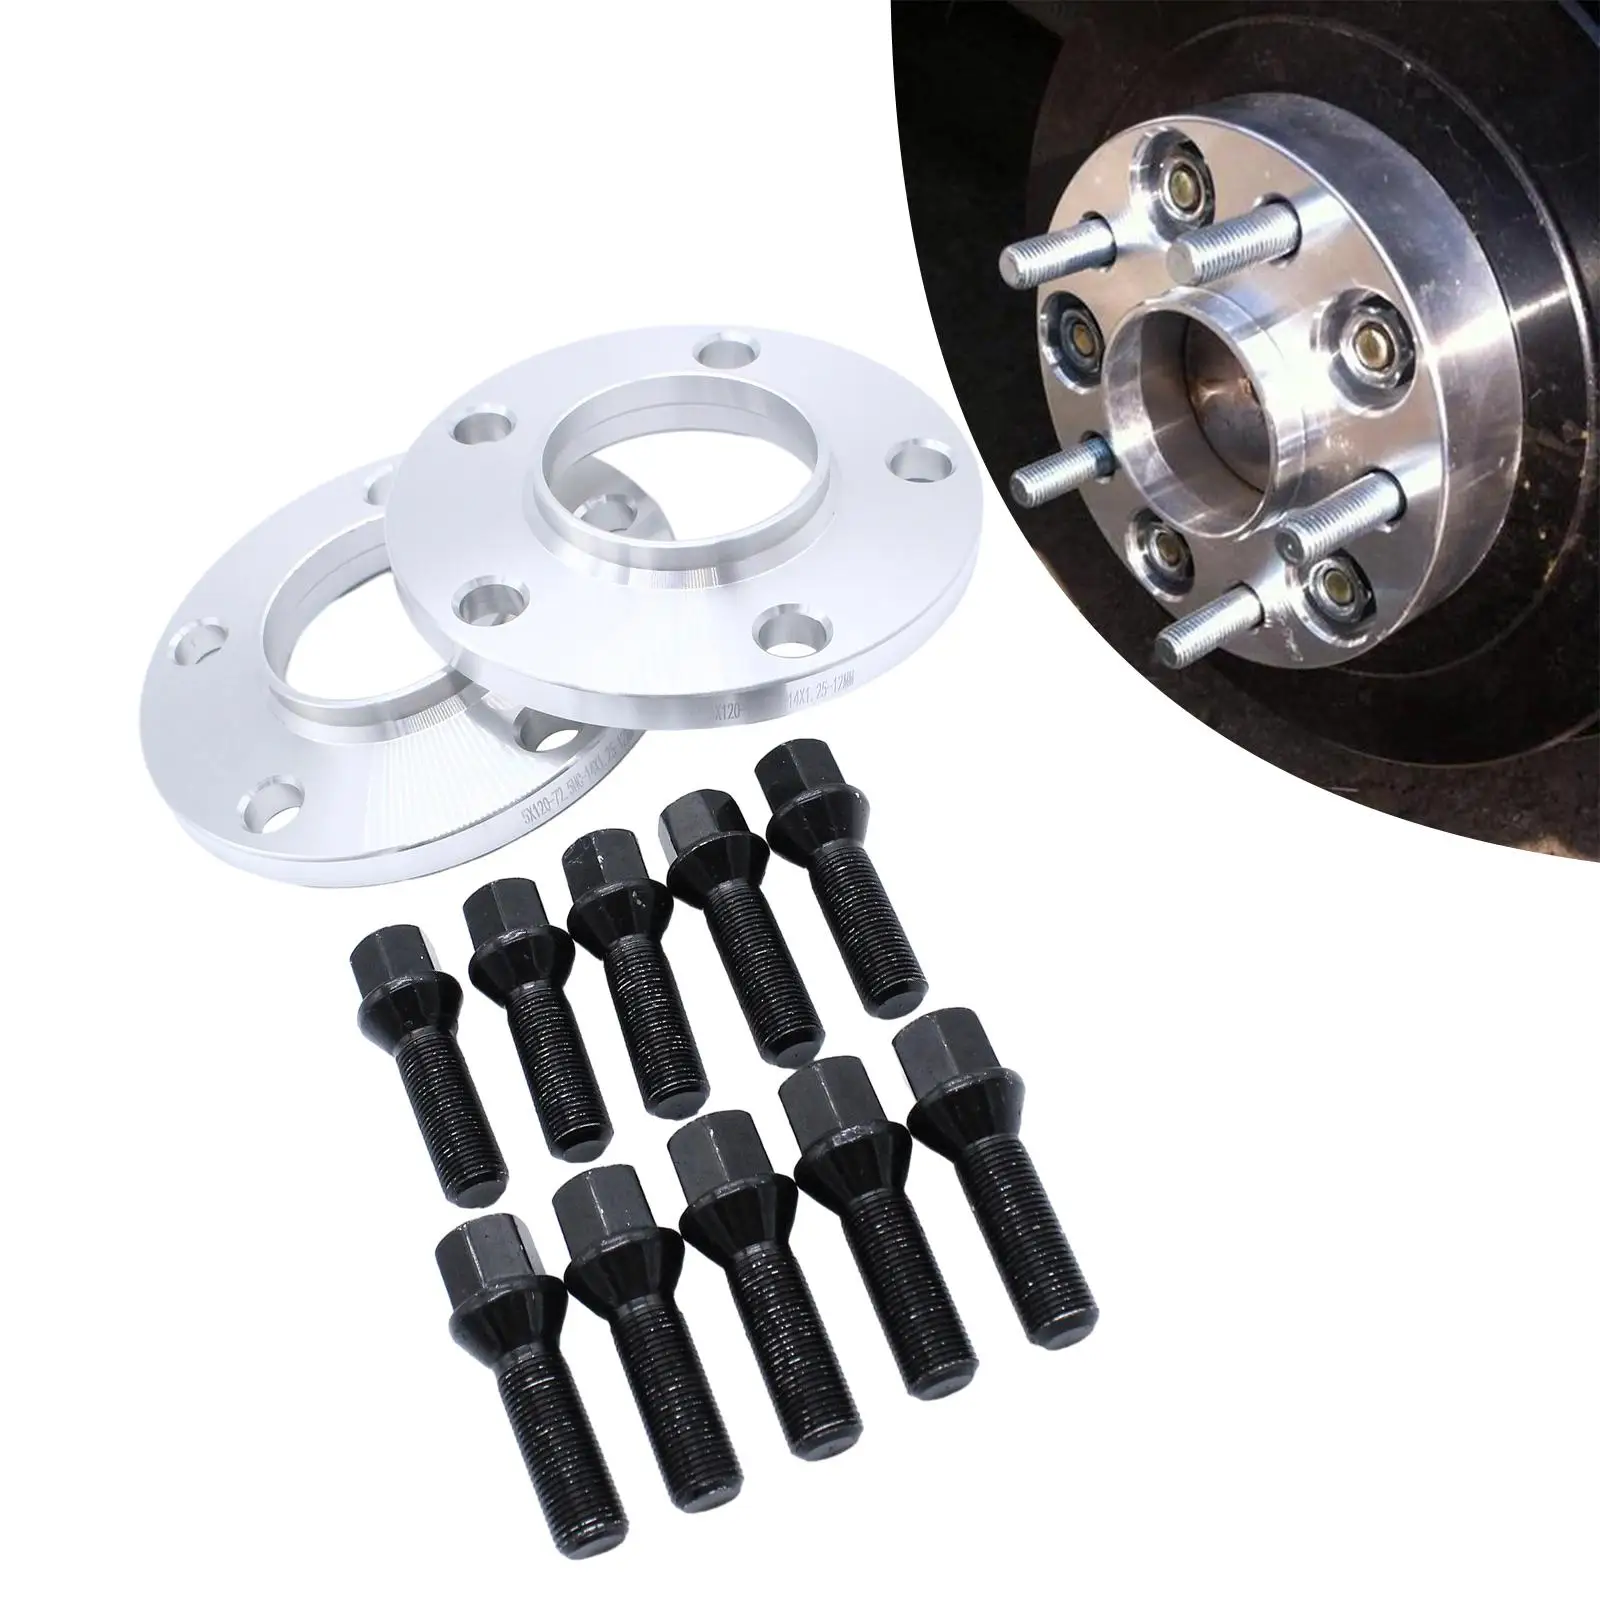 2x Wheel Spacers Hubcentric Forged Spacers Easy to Install Wheel Accessories Replaces with 10x Studs for Ford Ranger